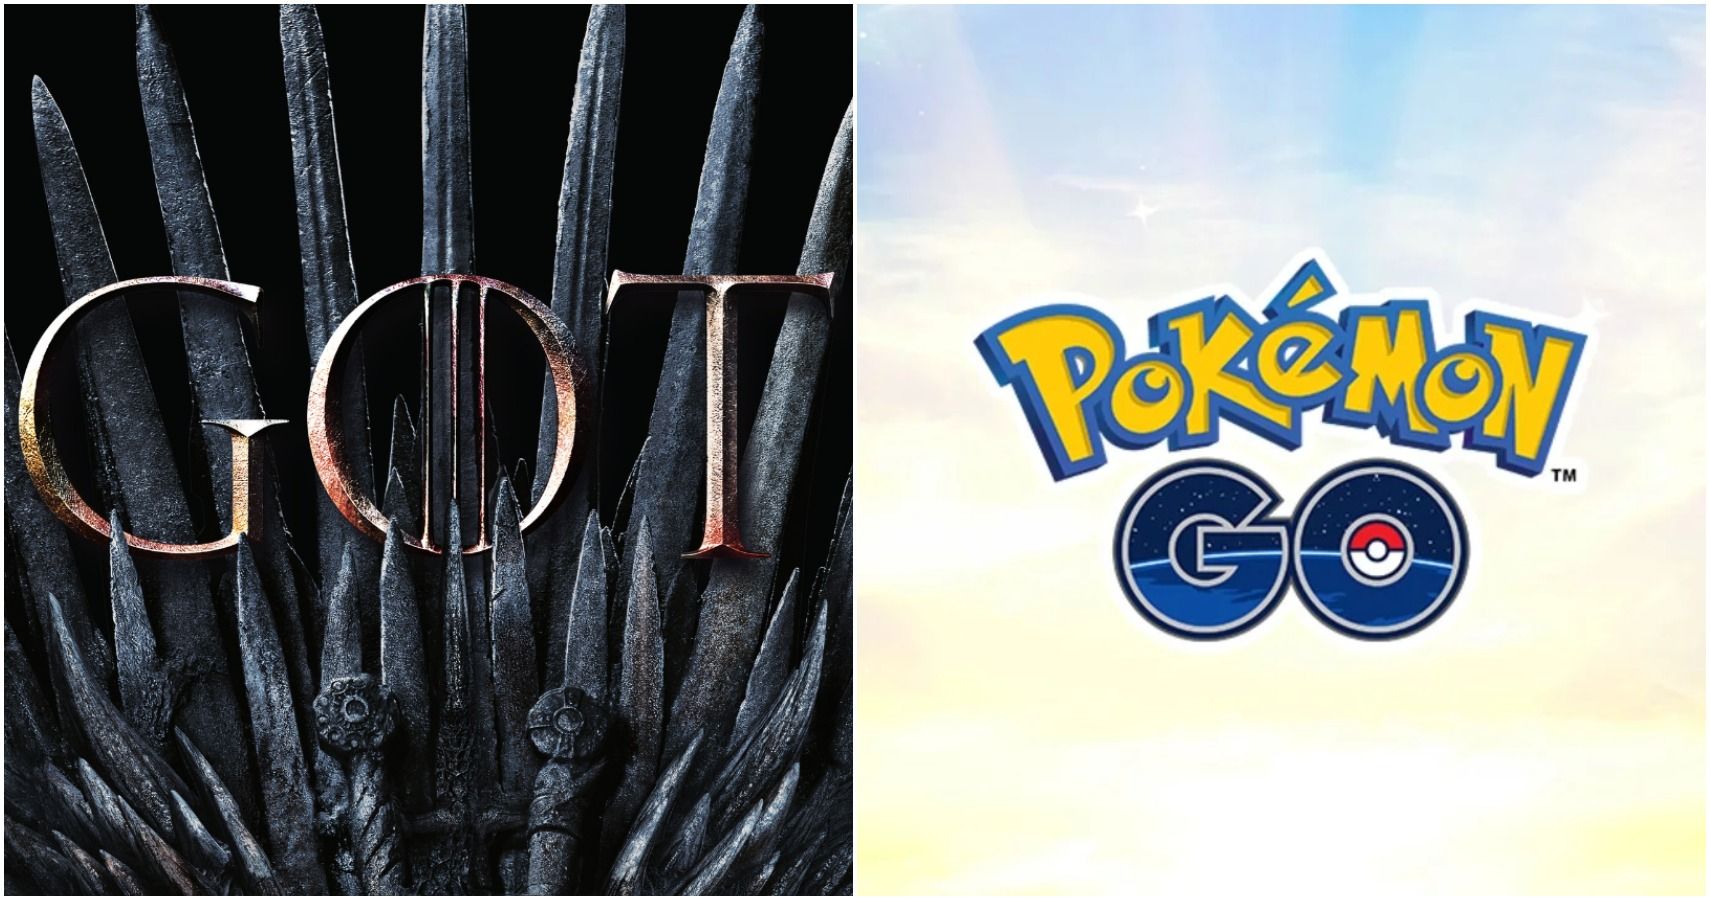 Pokemon Go Meets Game Of Thrones The Playstyle Of The Main Characters